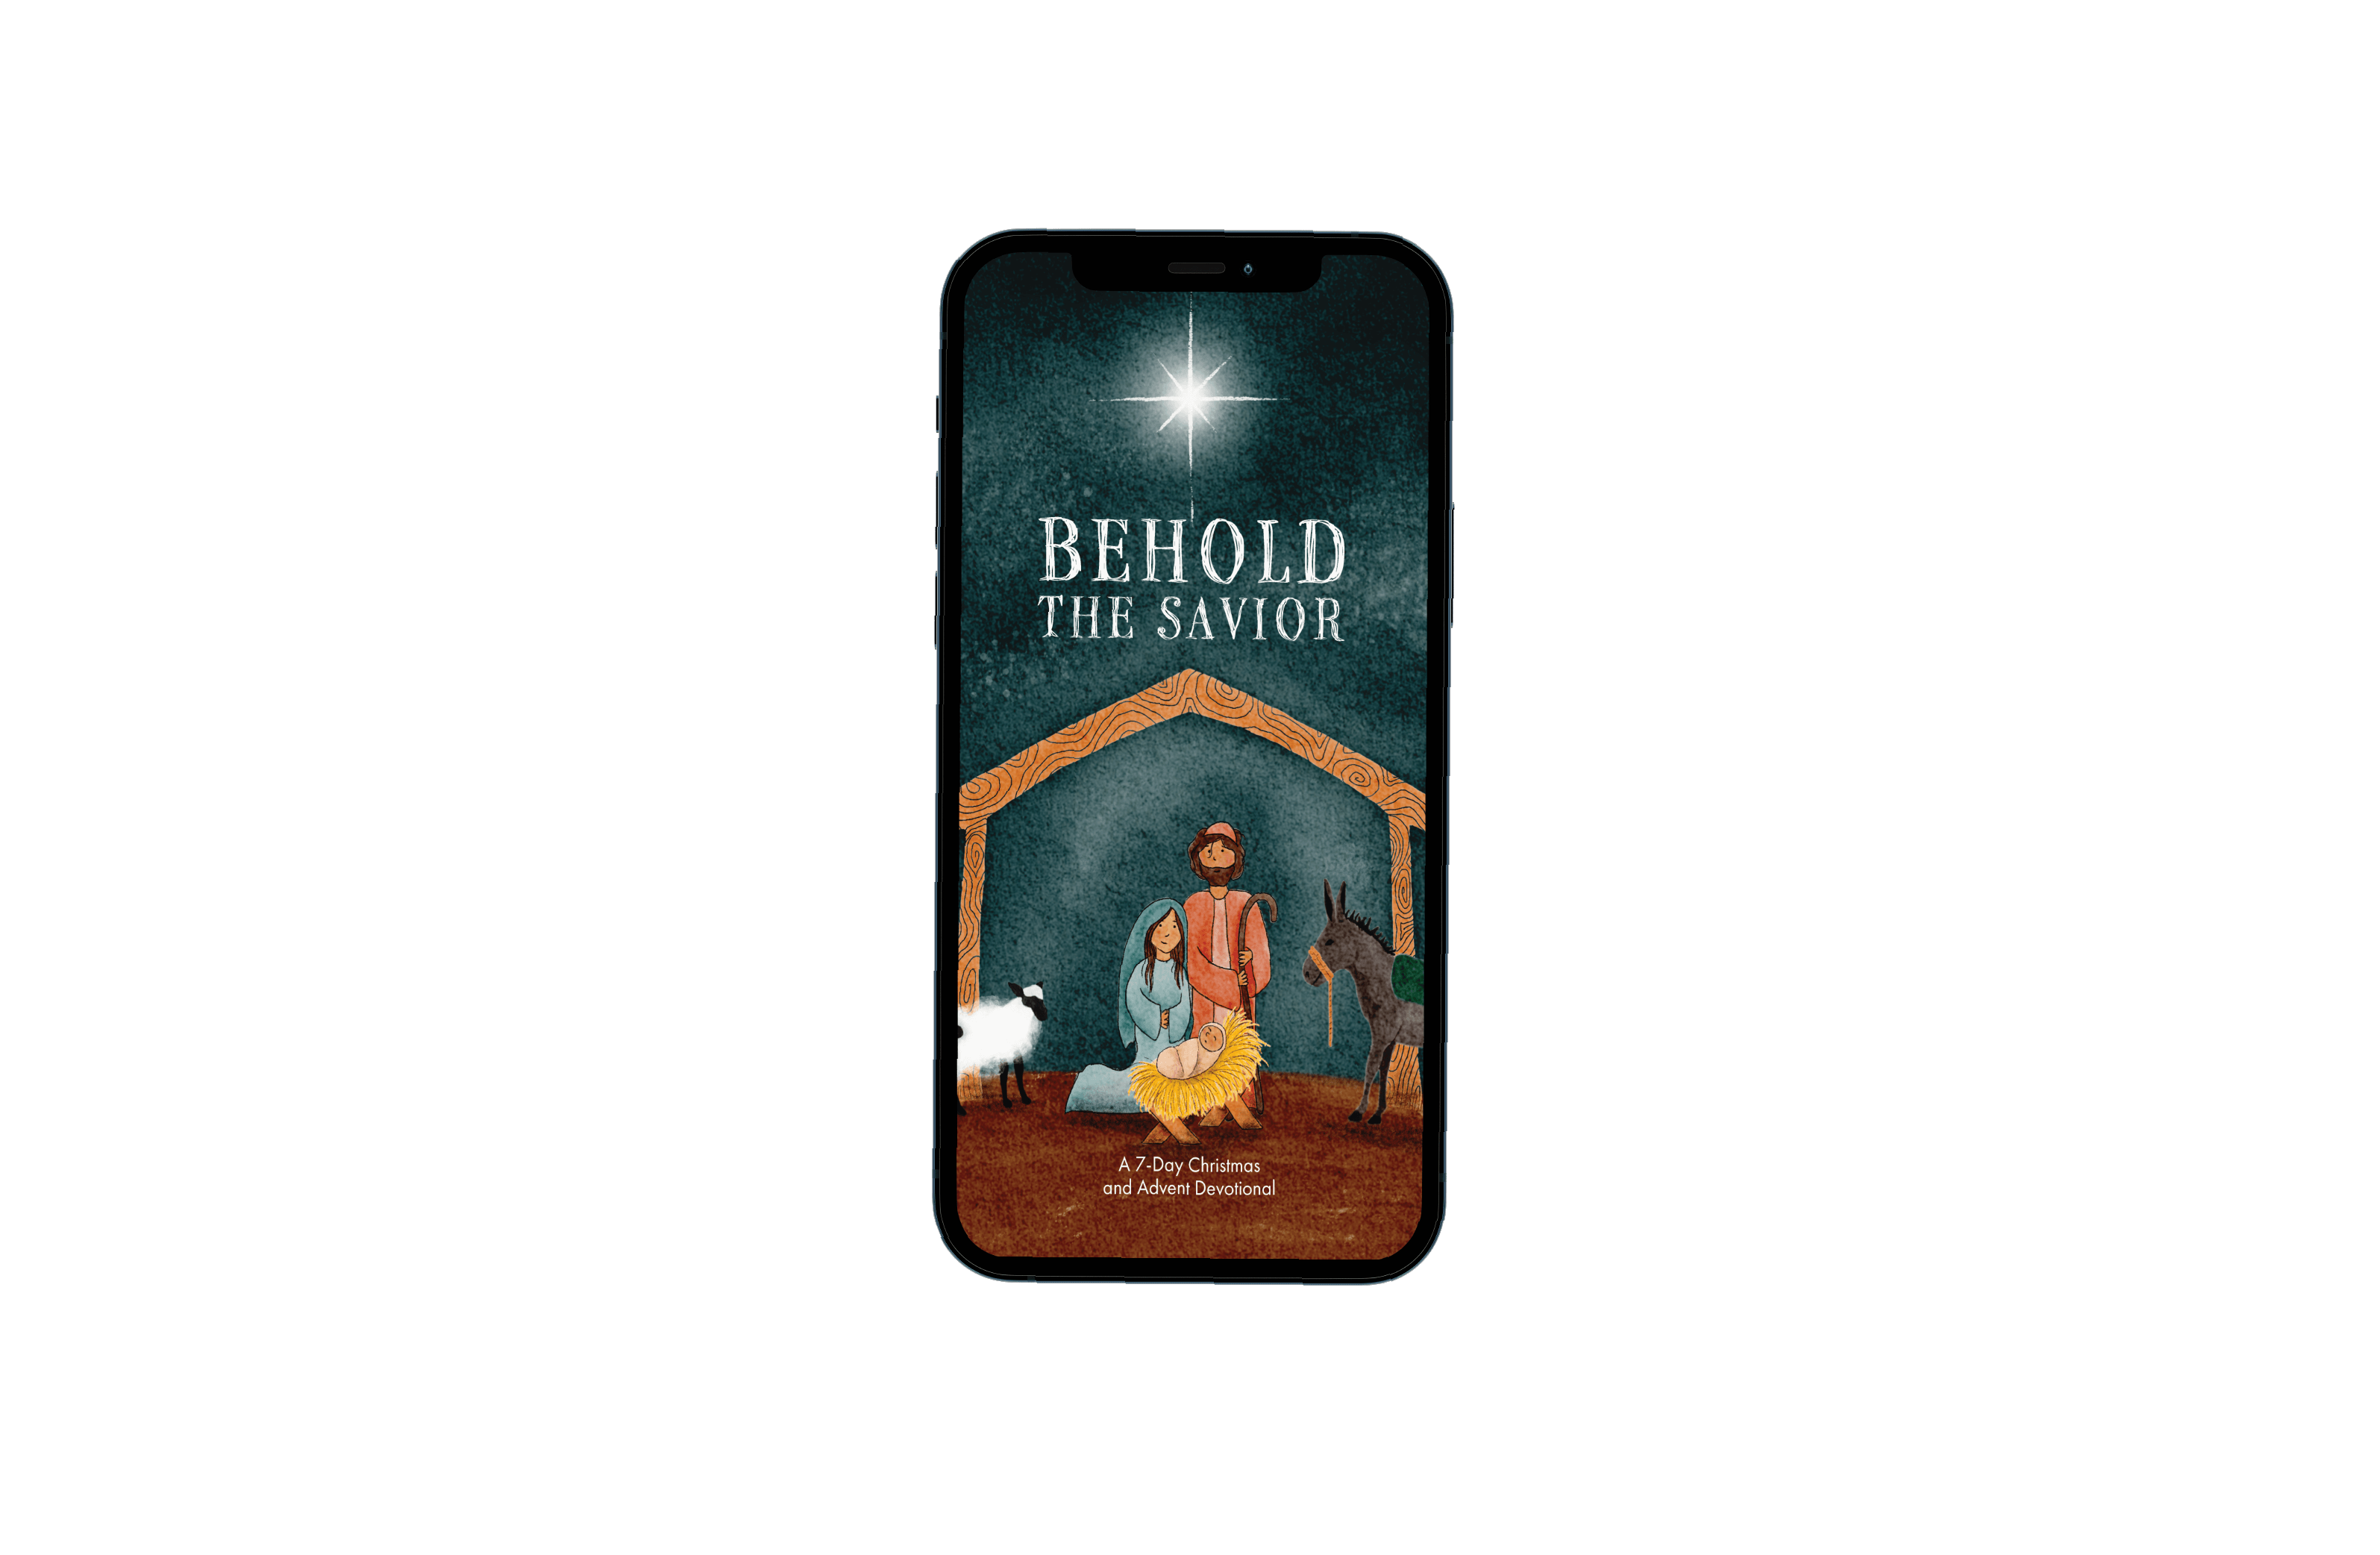 [DOWNLOADABLE VERSION] Behold the Savior: A 7-Day Christmas and Advent Devotional for Kids & Family